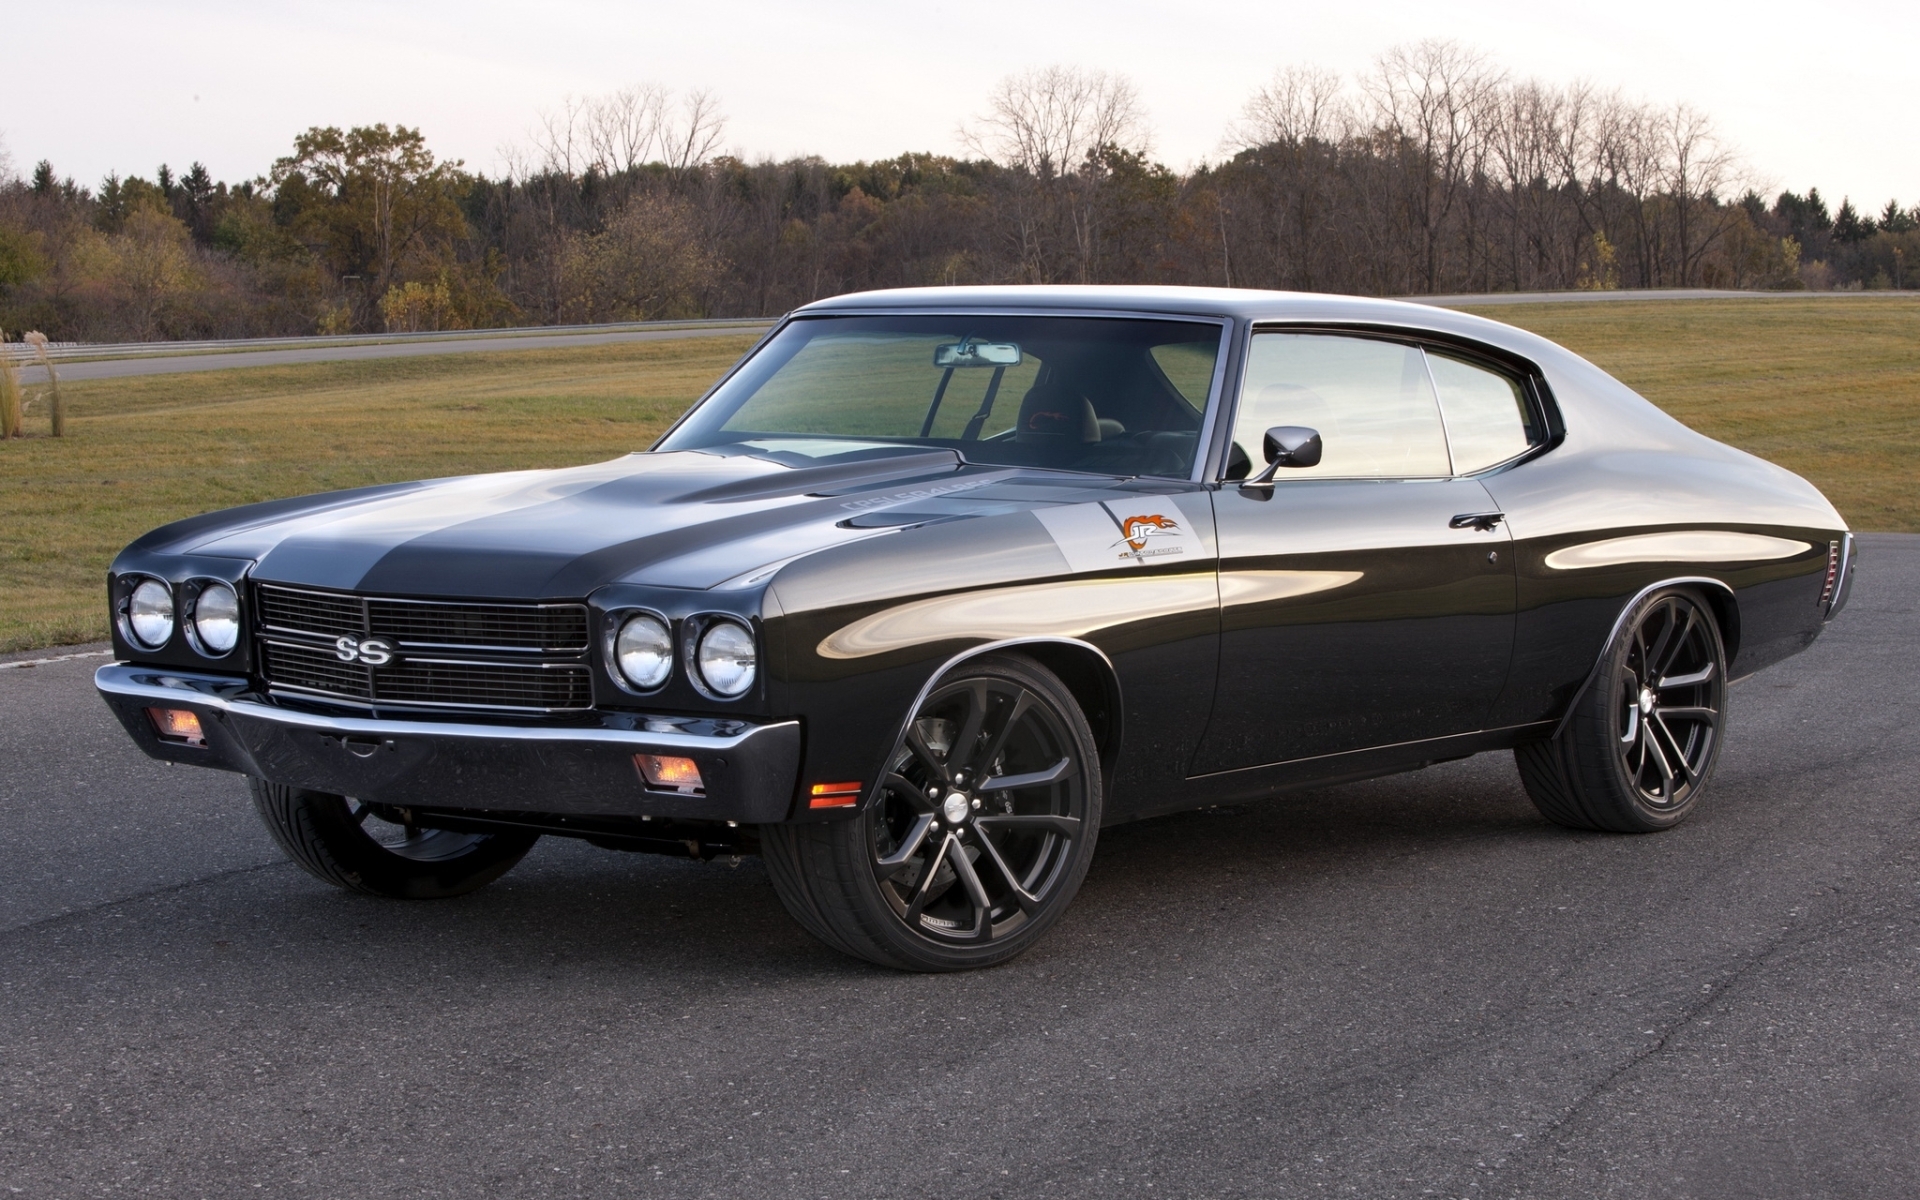 Chevelle by chevrolet photo